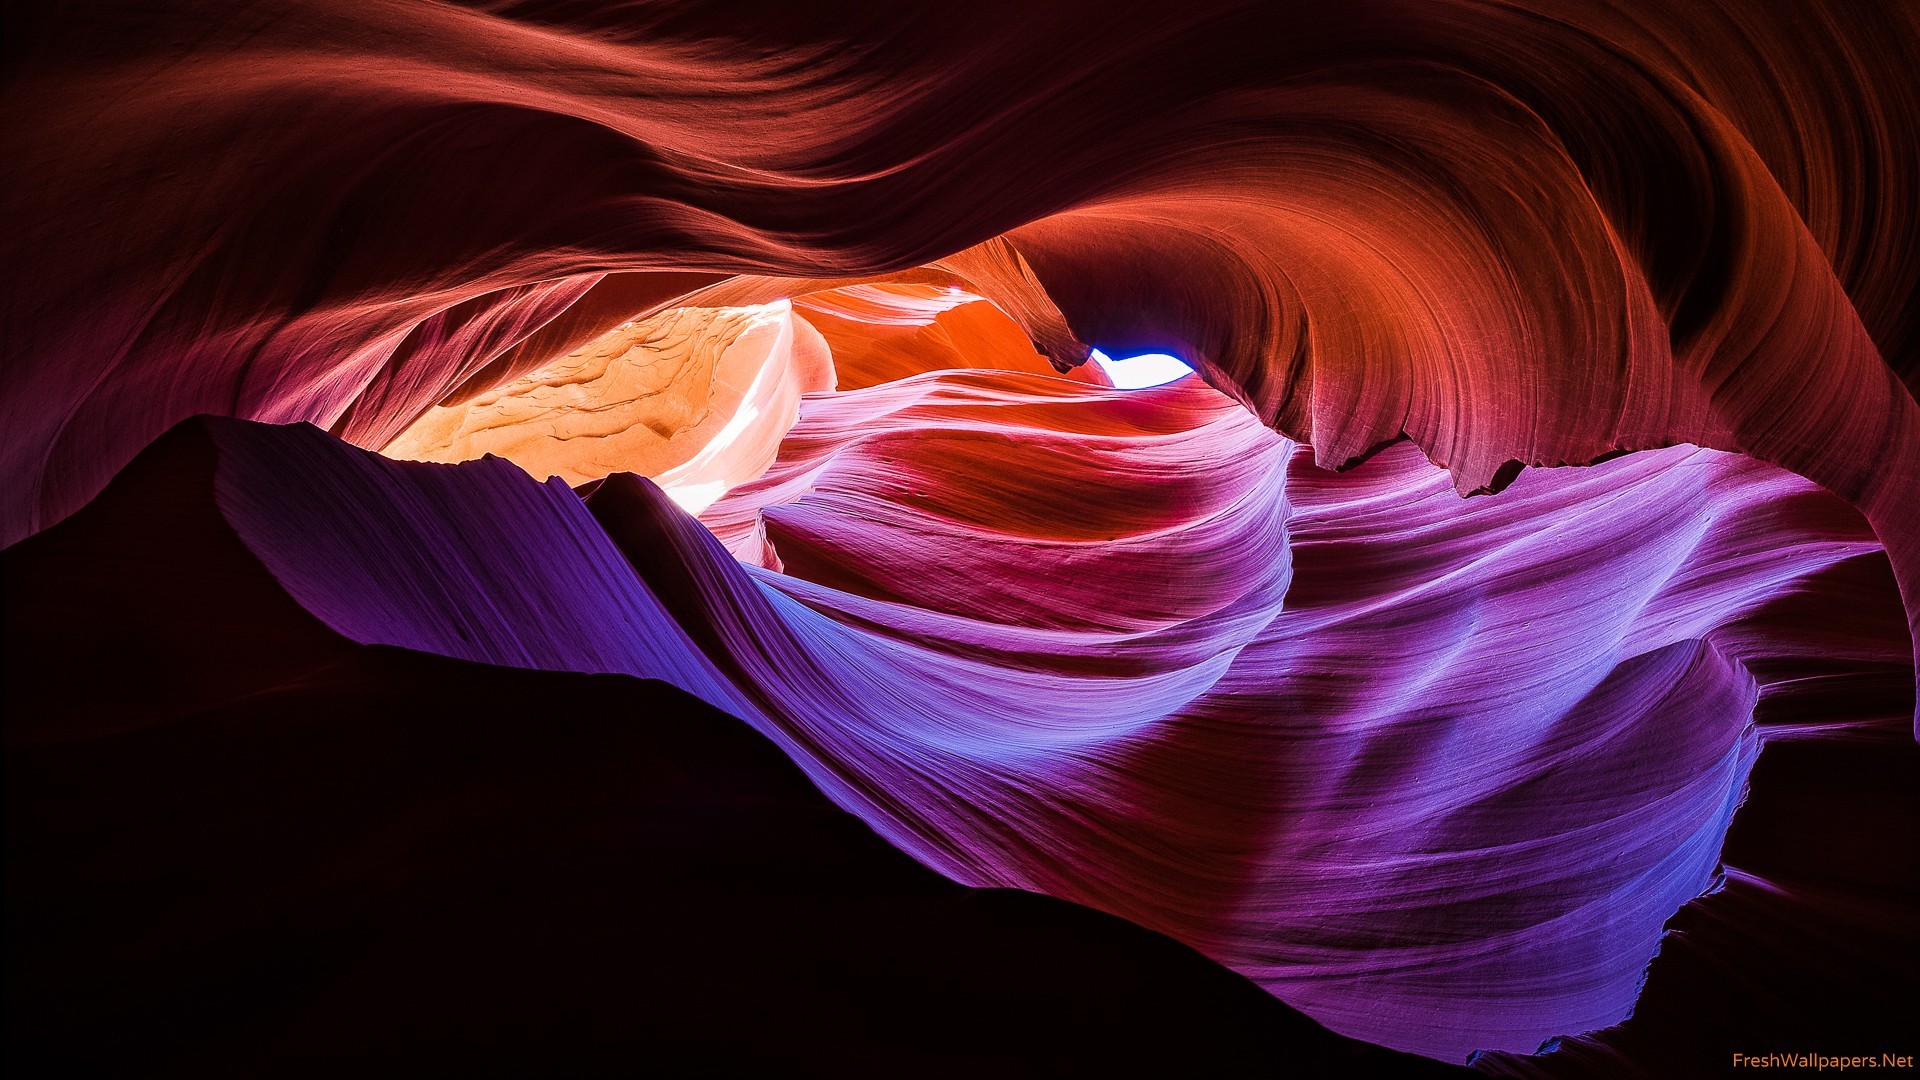 1920x1080 Image result for antelope canyon wallpaper